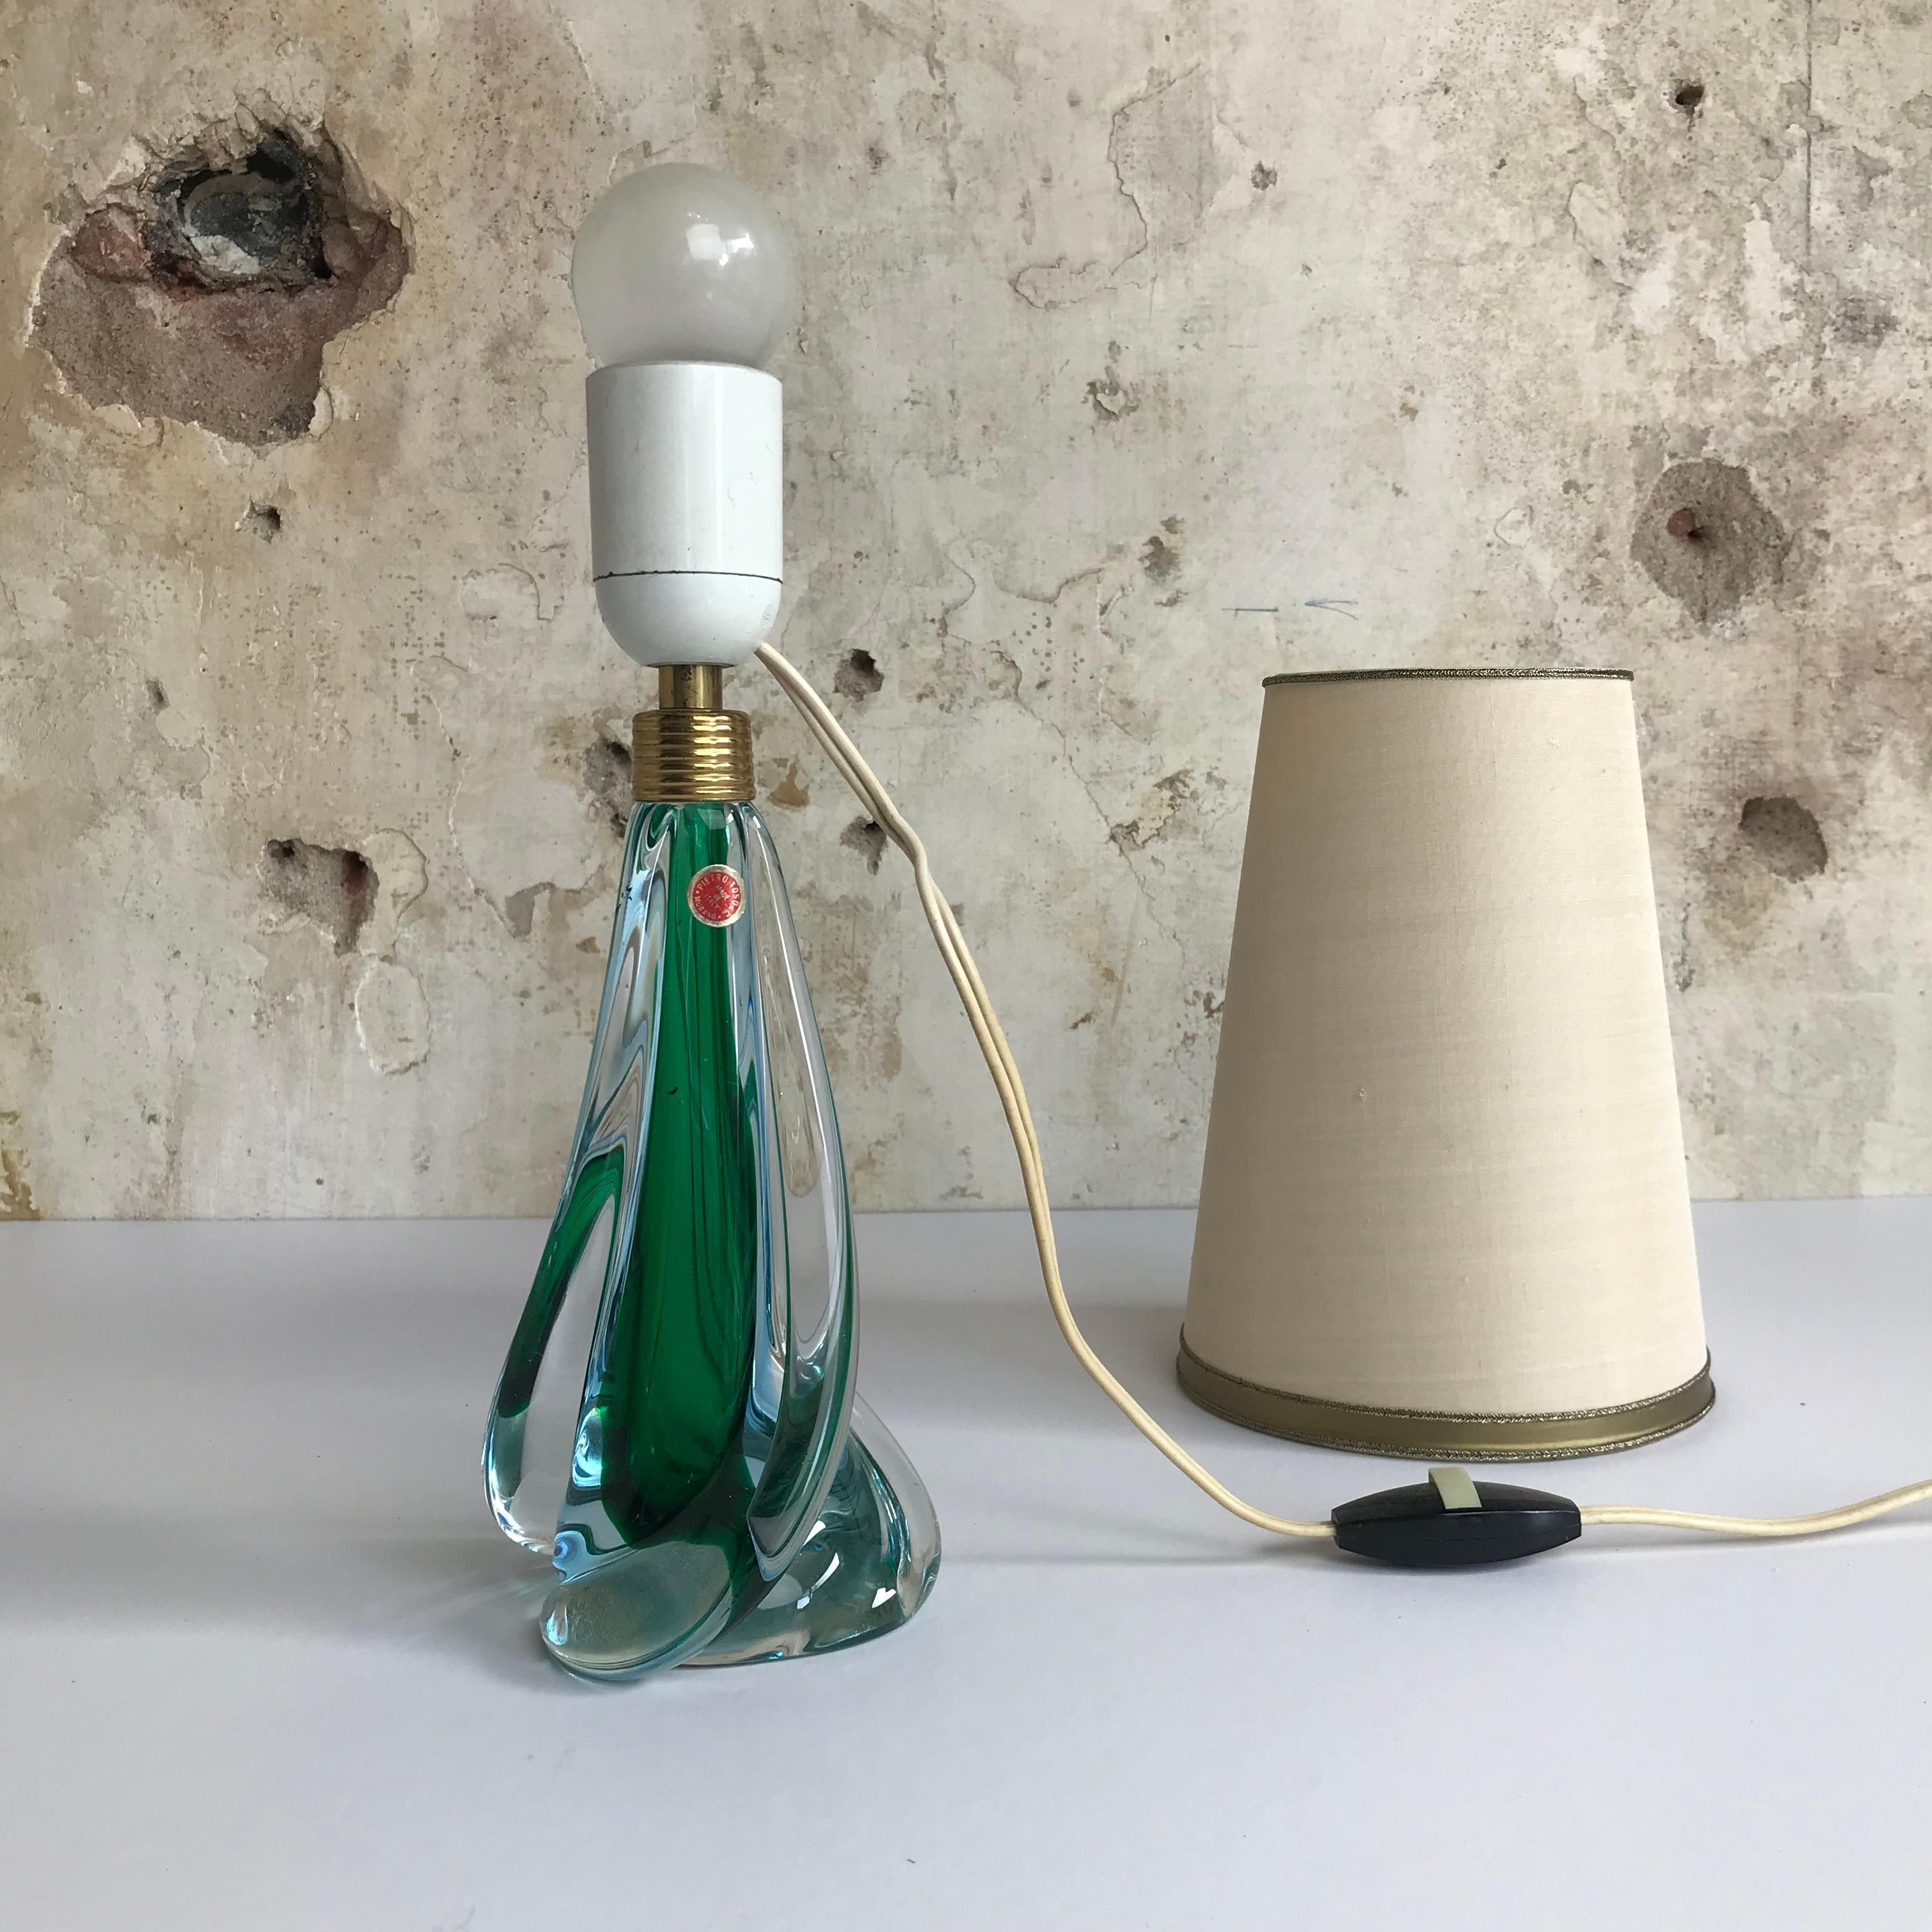 Mid-Century Modern 1950s Italian Murano Art Glass Lamp by Pietro Toso, Midcentury, Vintage For Sale